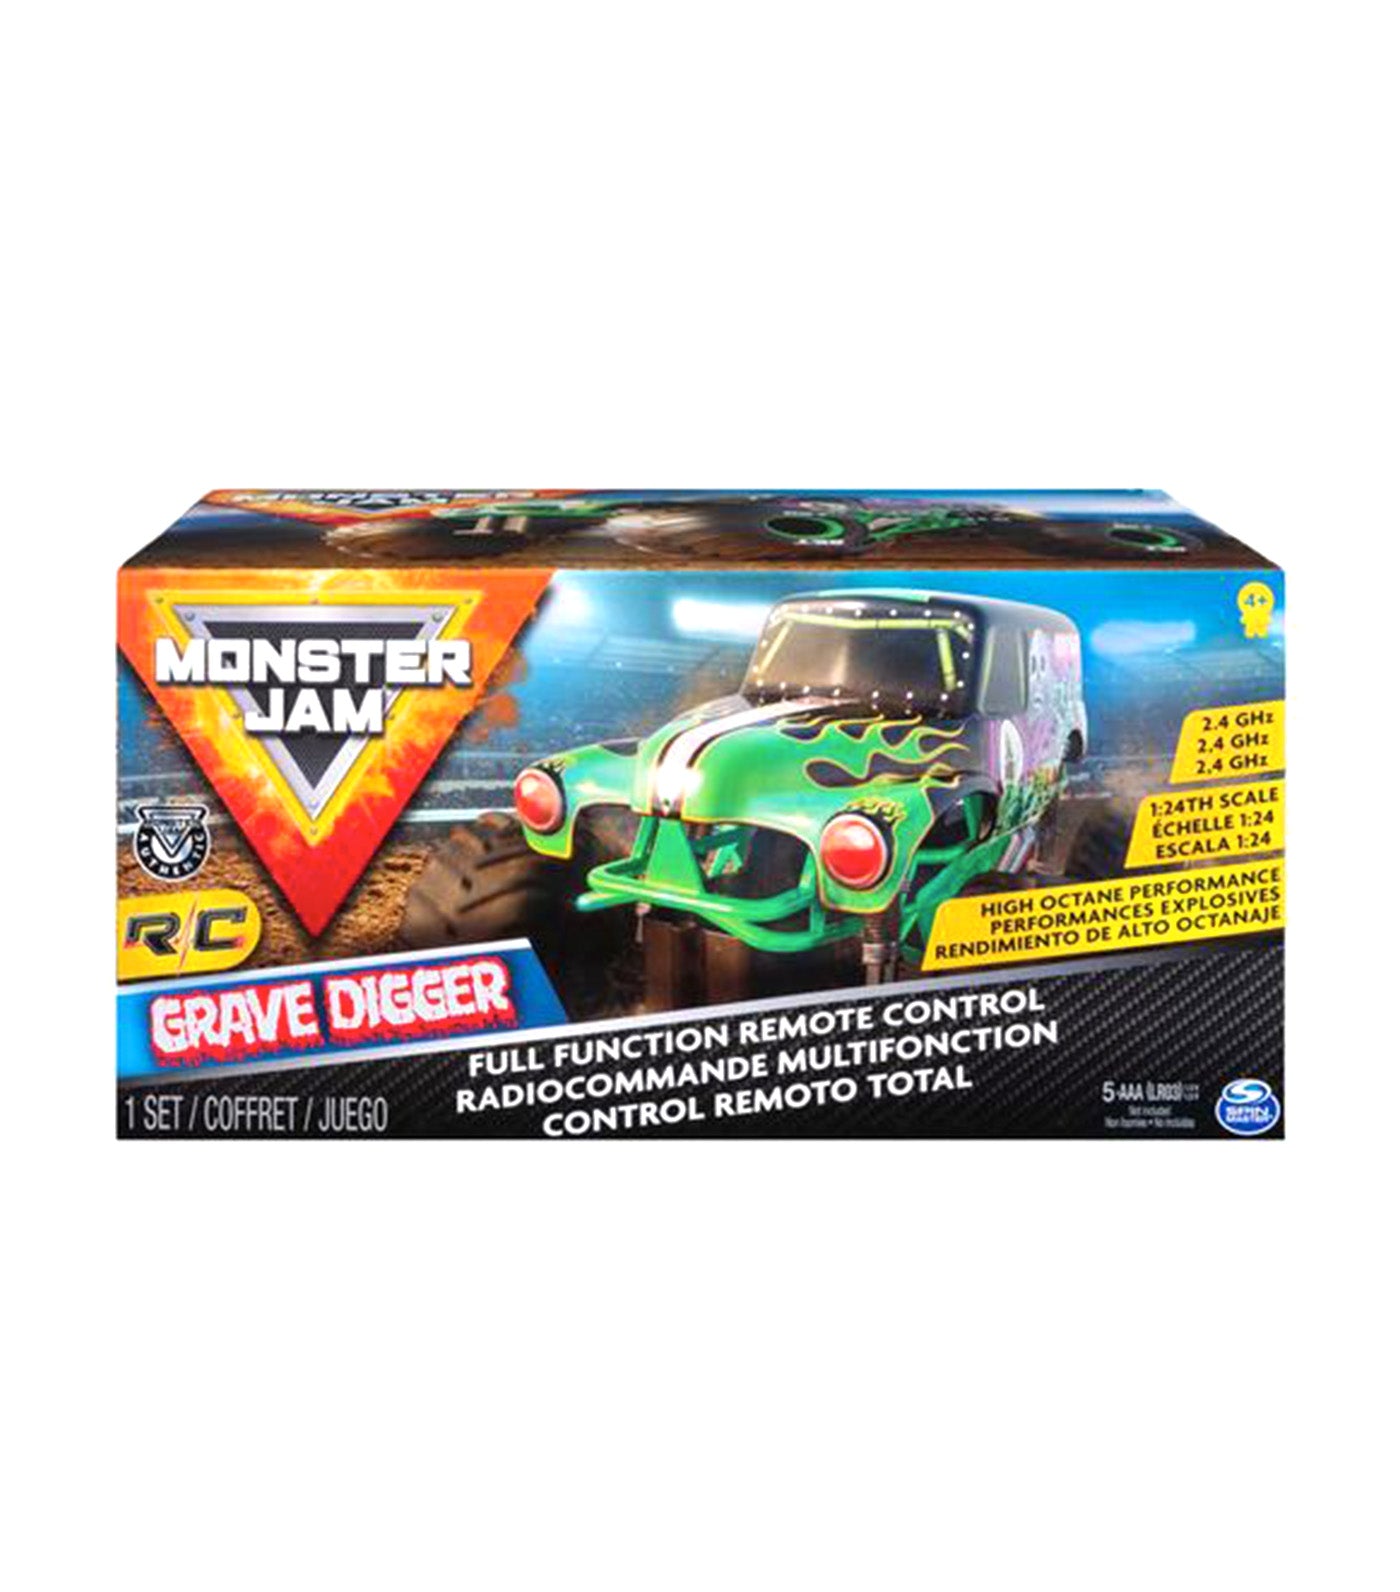 Grave Digger Remote Control Monster Truck